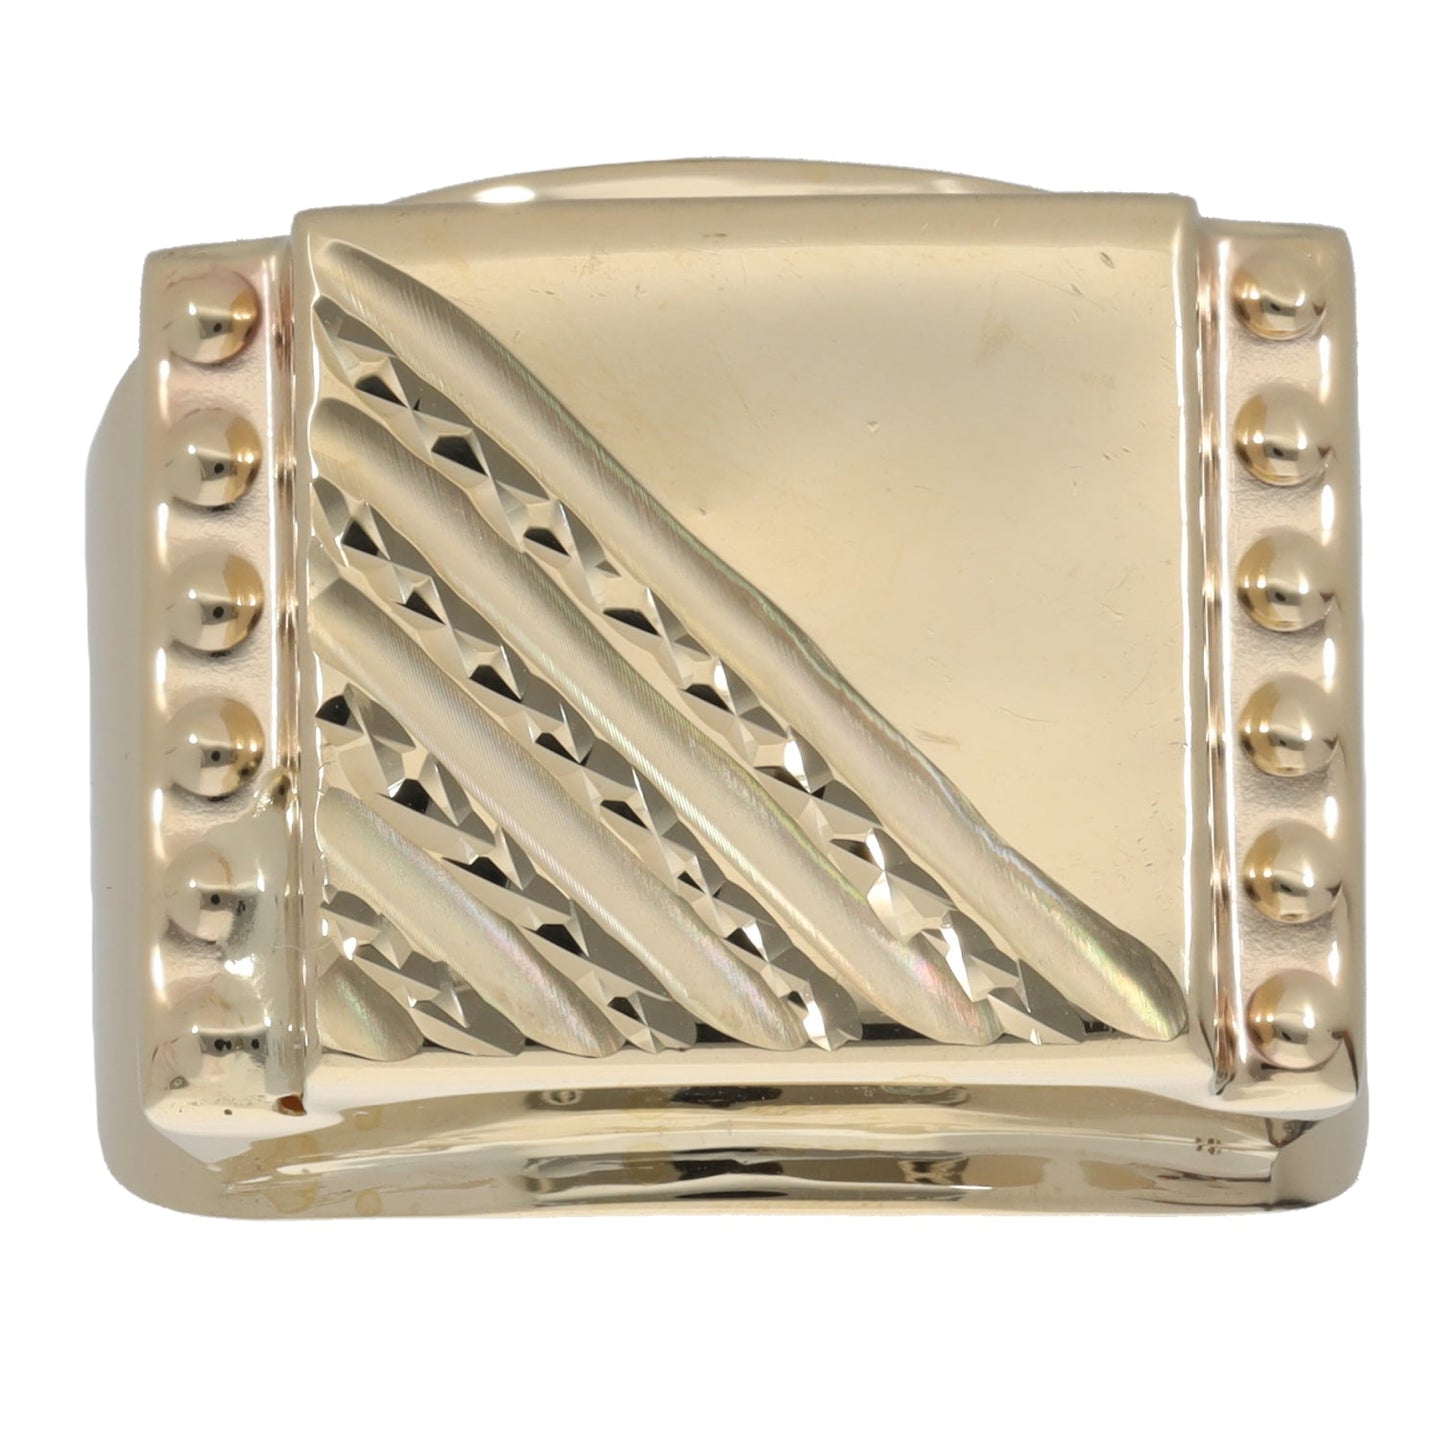 New 14ct Gold Signet Ring